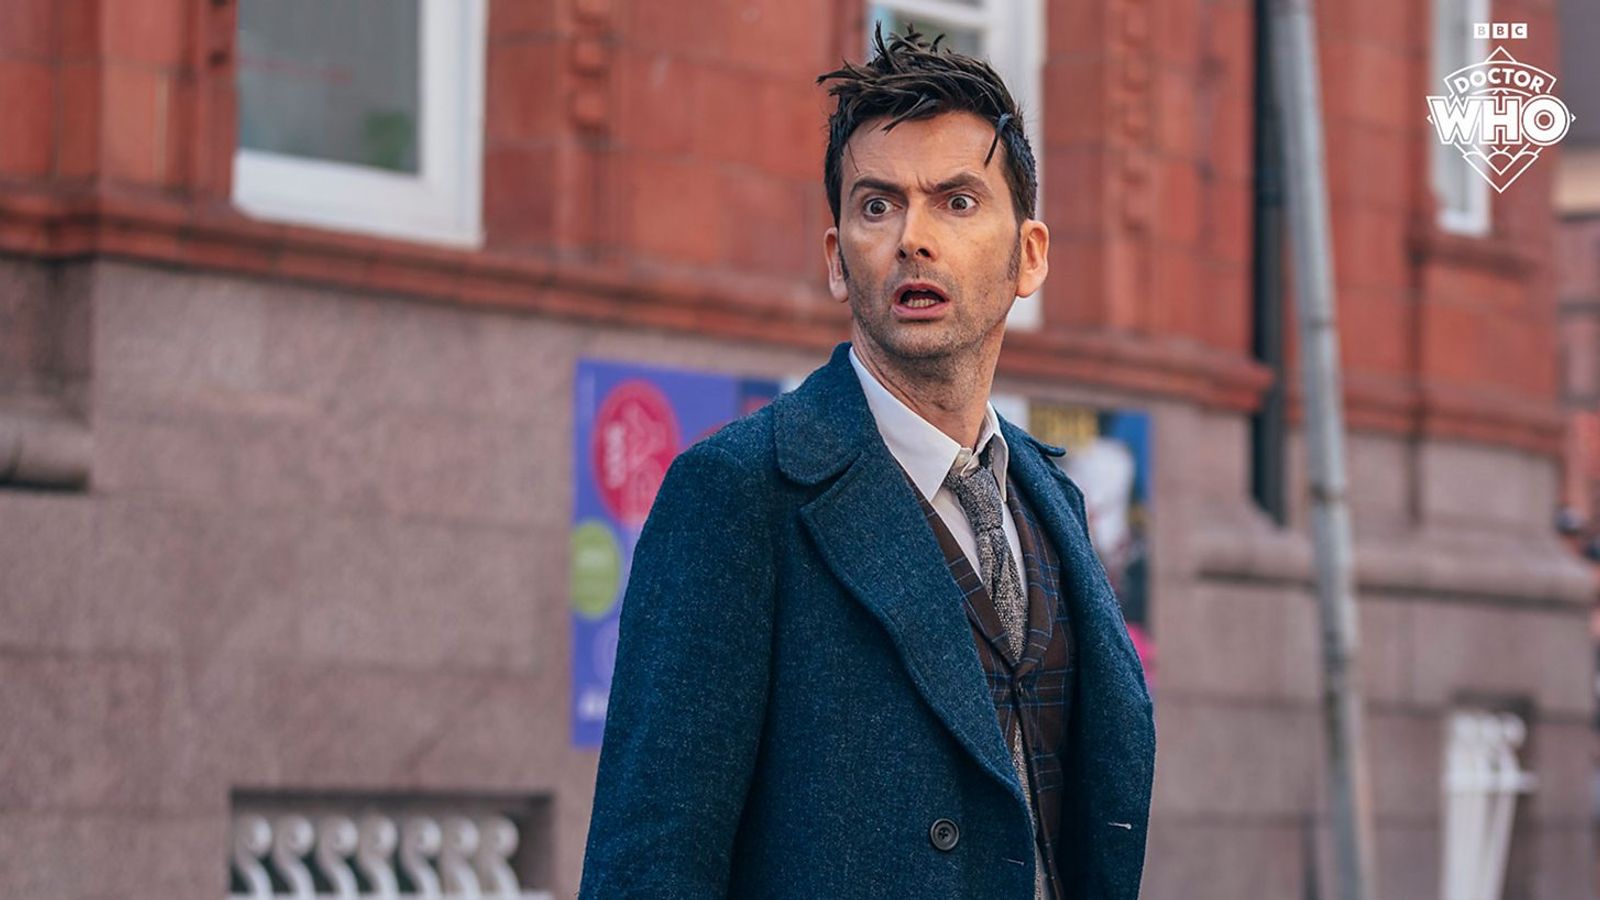 Doctor Who David Tennant and Catherine Tate appear in latest trailer